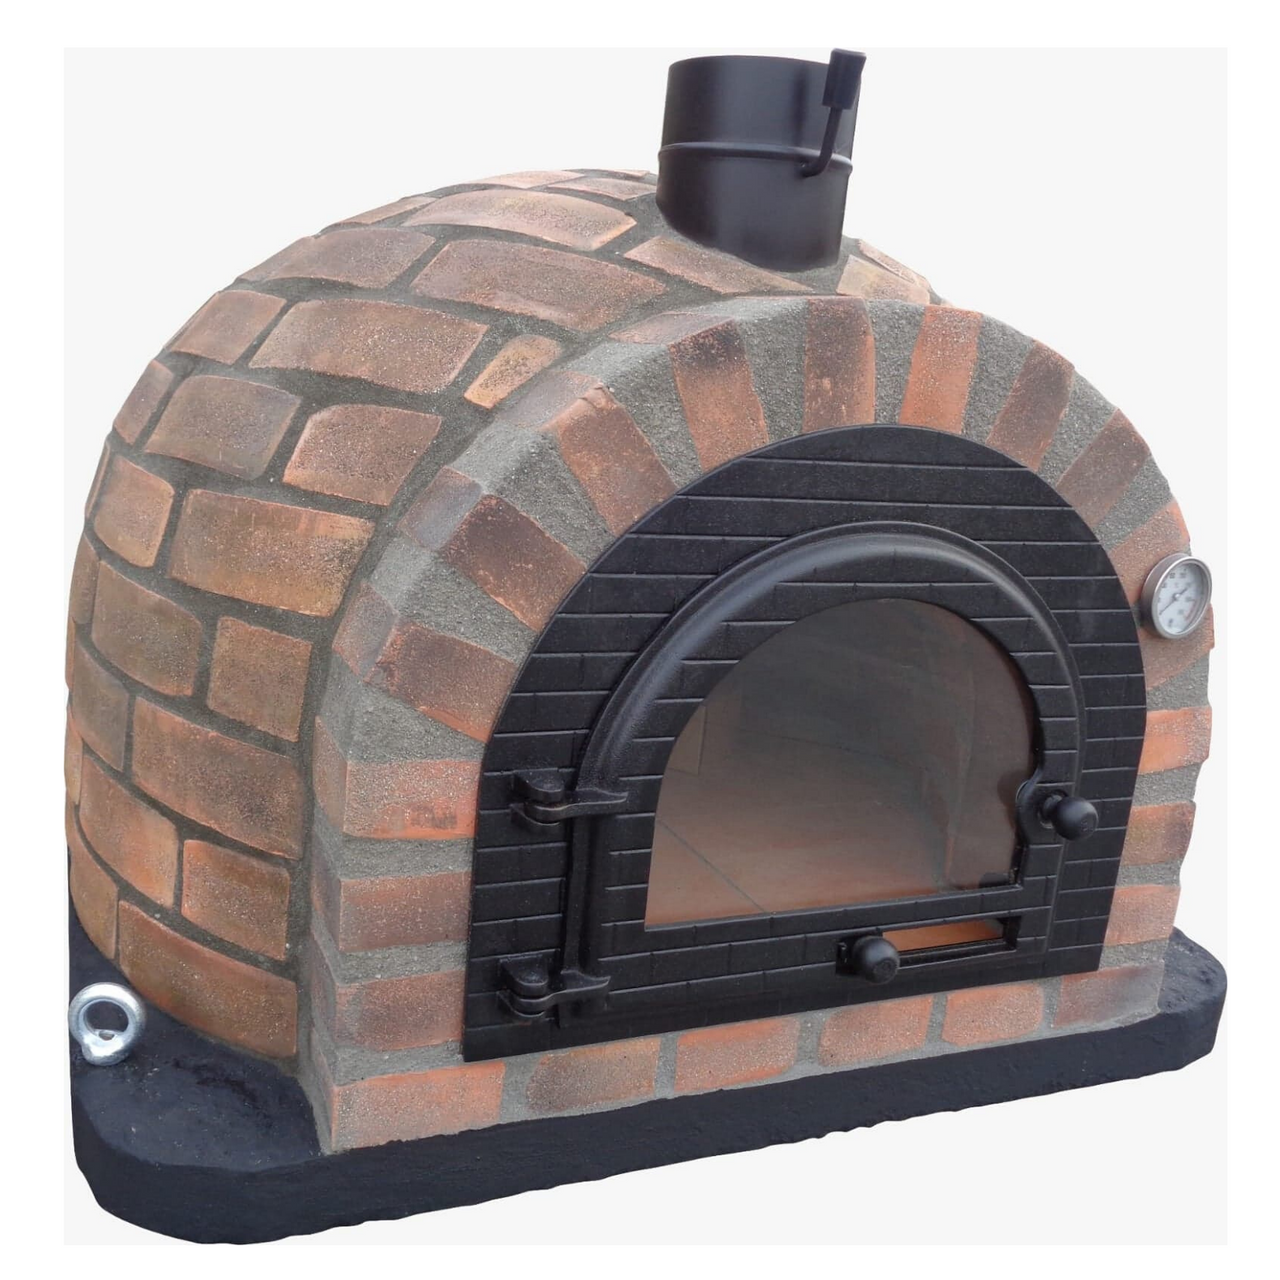 Braga Fiesta Portable Oven Traditional Wood Fired Oven